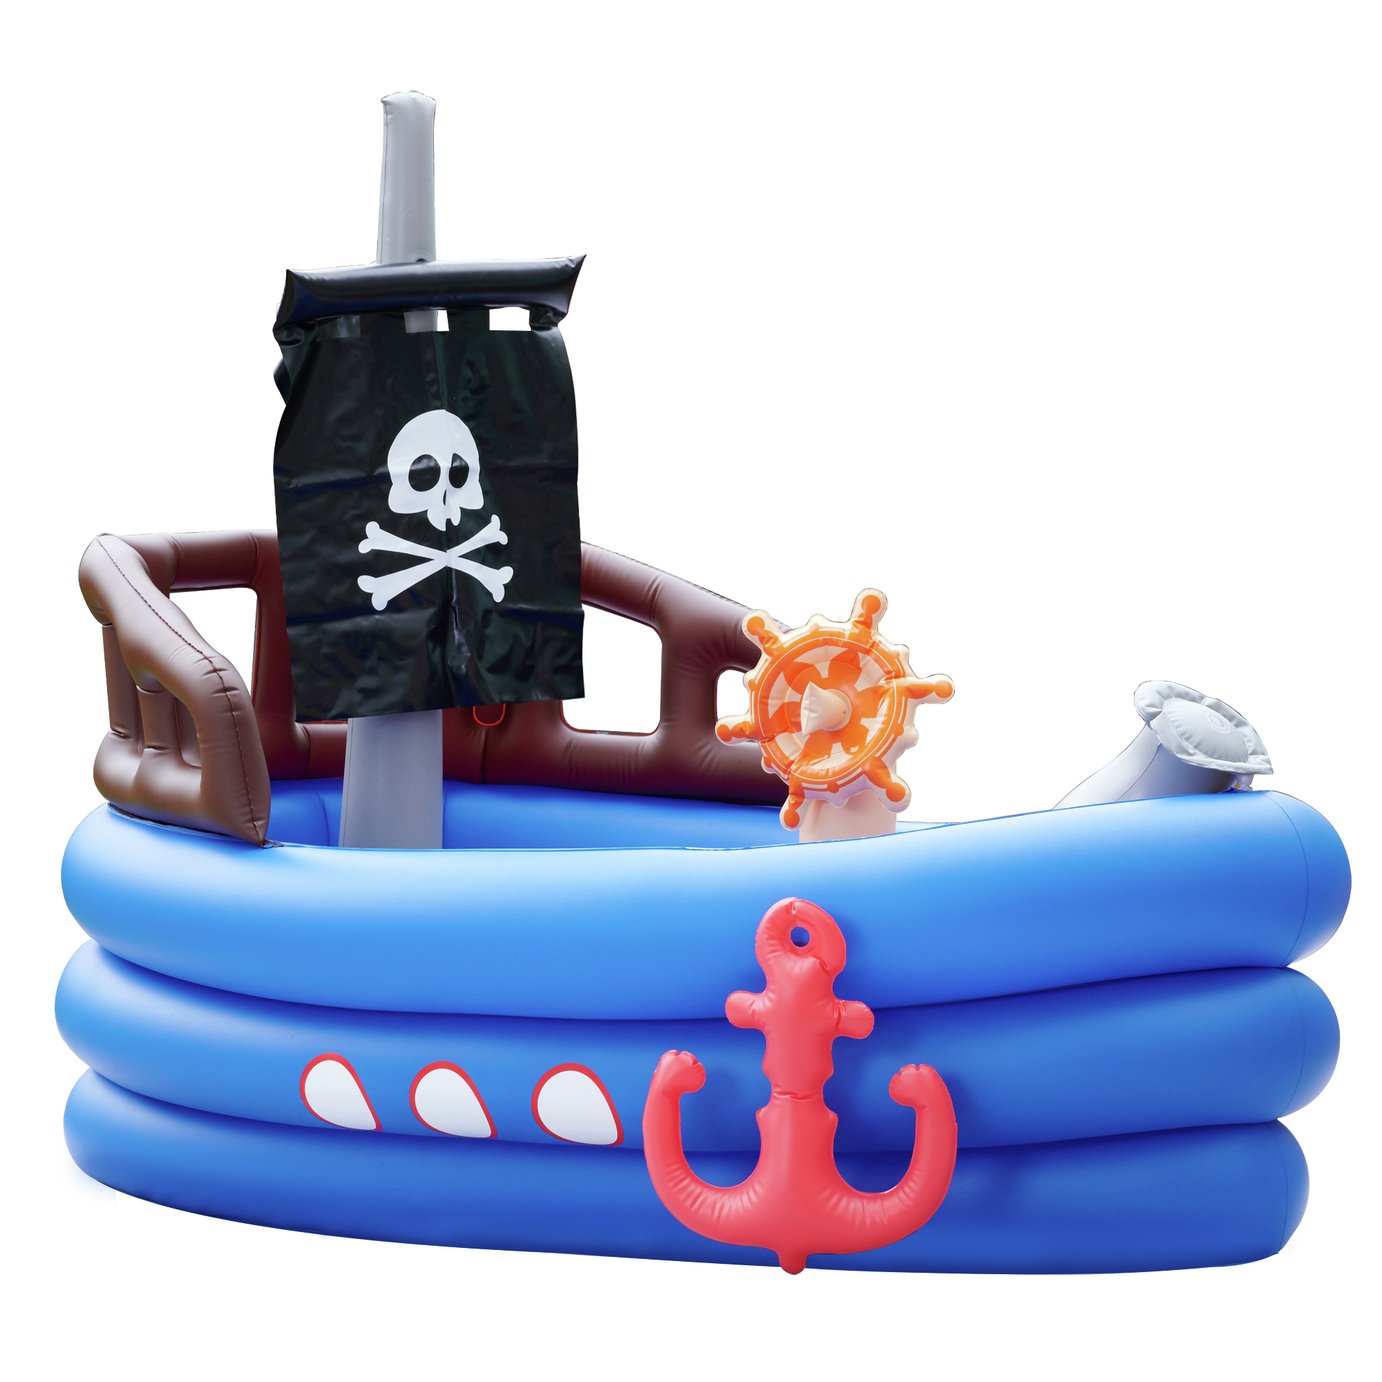 Teamson Kids 8ft Pirate Inflatable Water Play Centre Review